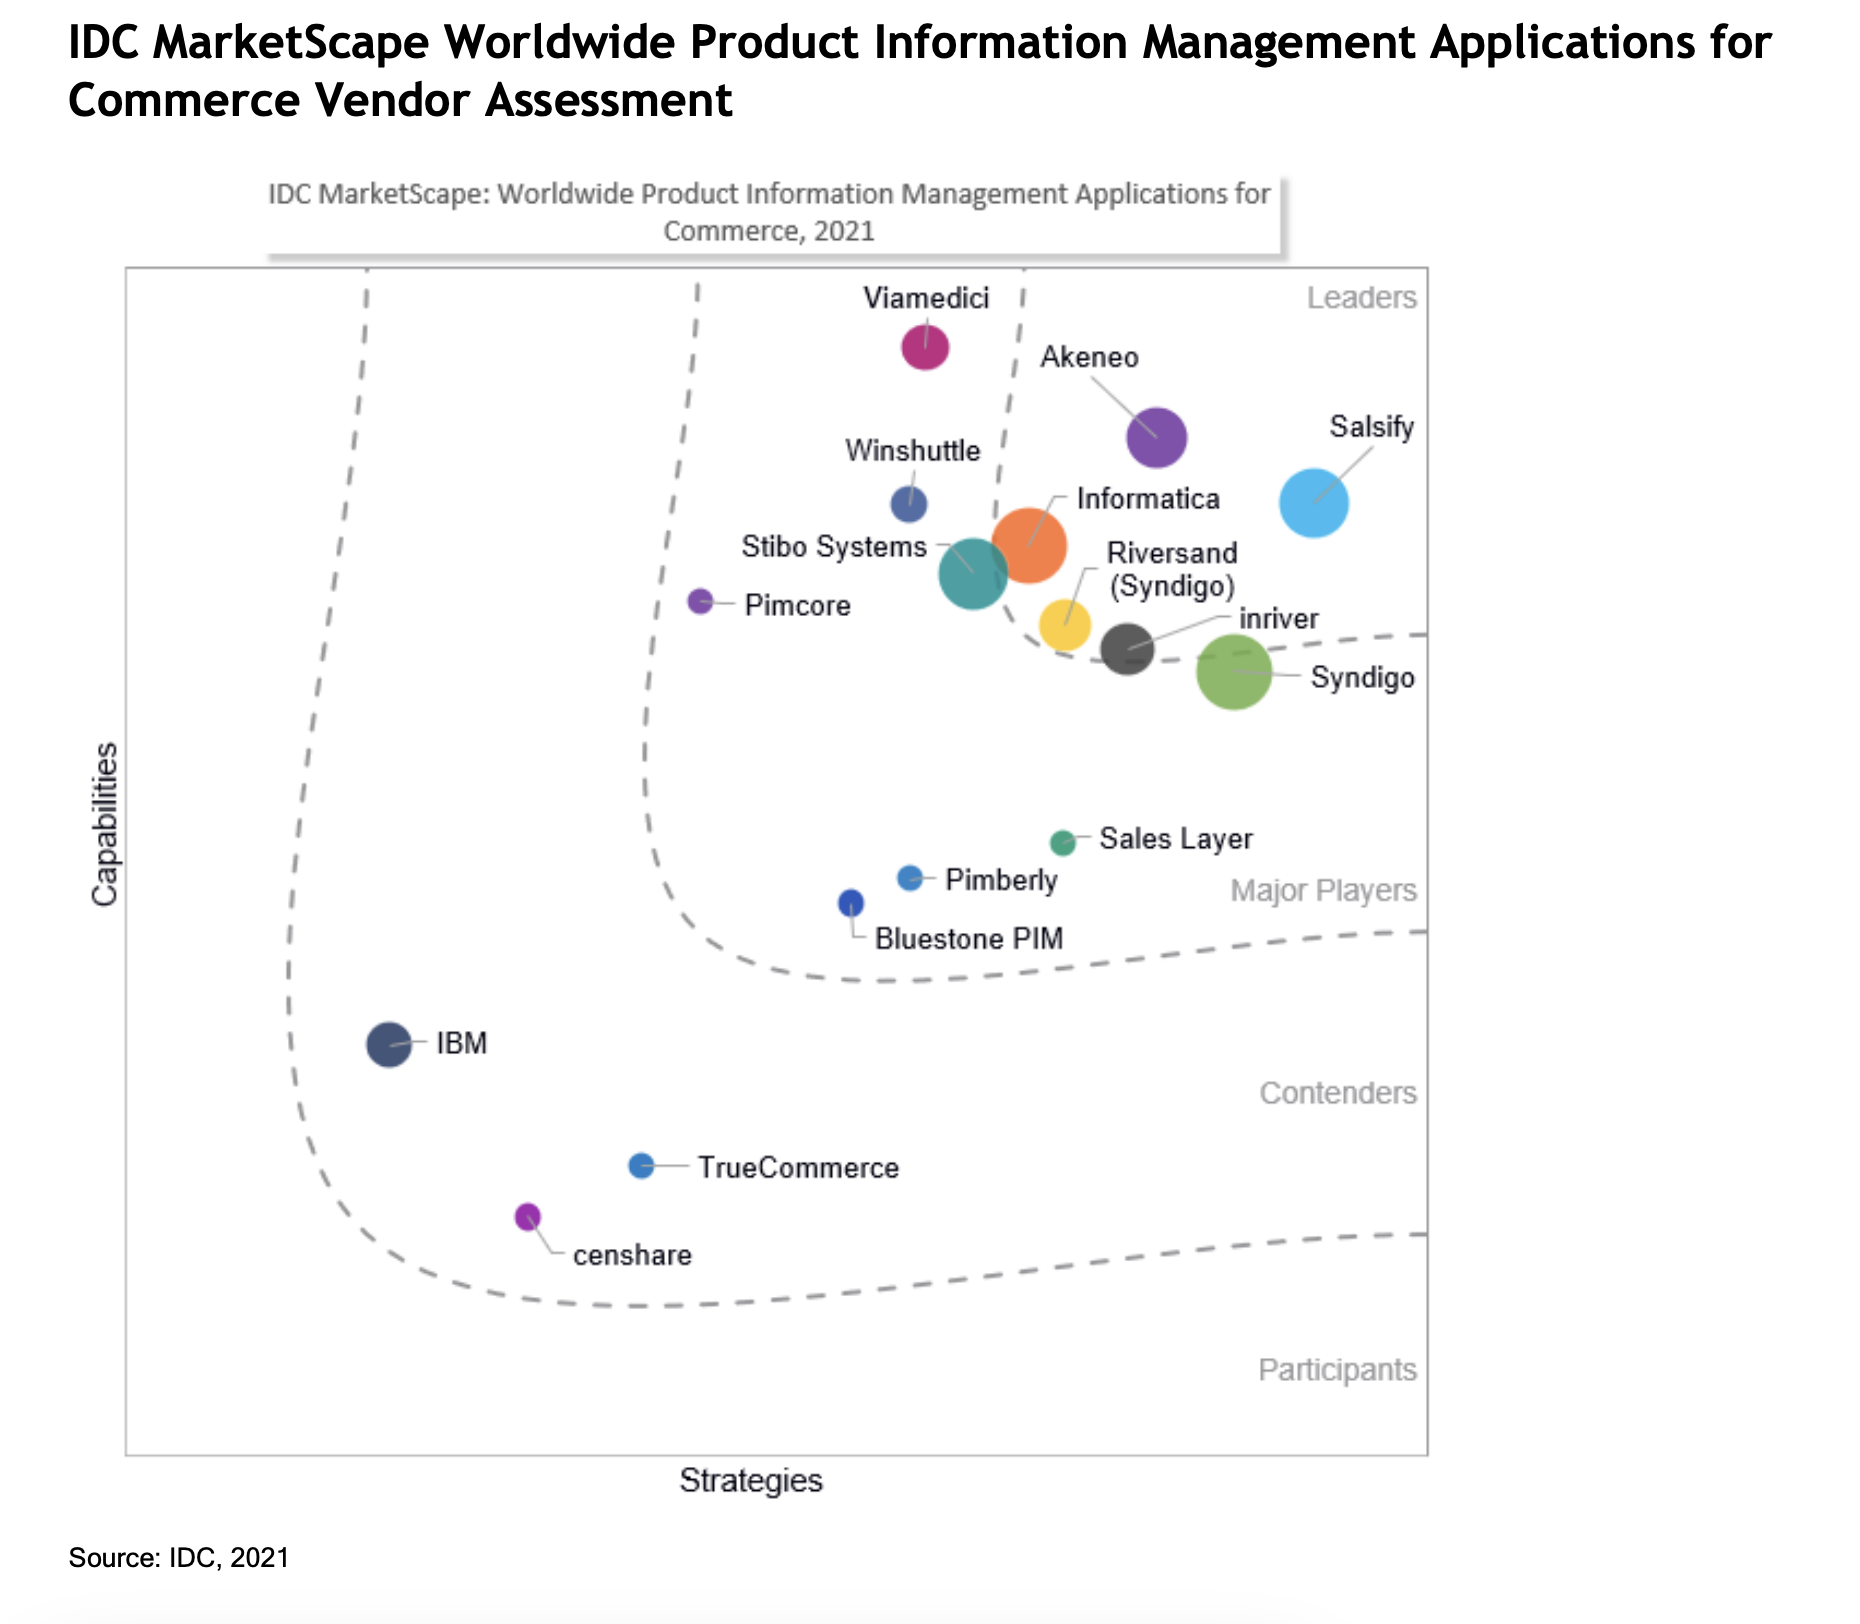 IDC MarketScape graph showing Akeneo as a leader on the marketplace.